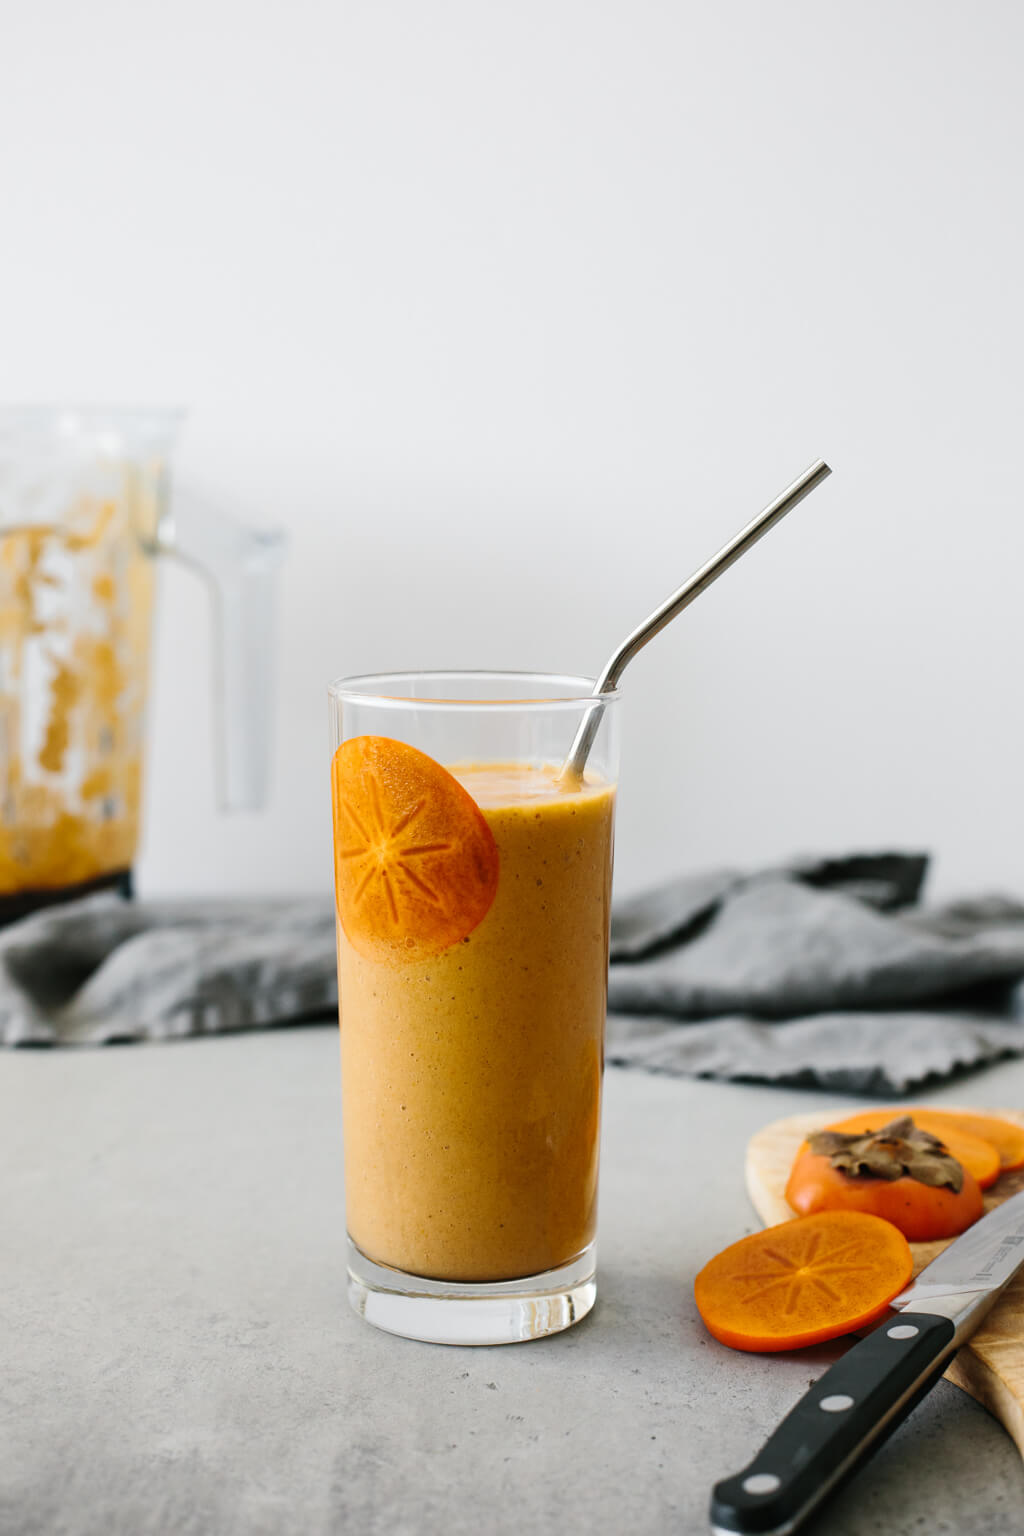 This persimmon smoothie is the perfect smoothie for fall. Made with persimmons, banana, ginger, cinnamon and cloves, it's slightly spiced and deliciously sweet. 